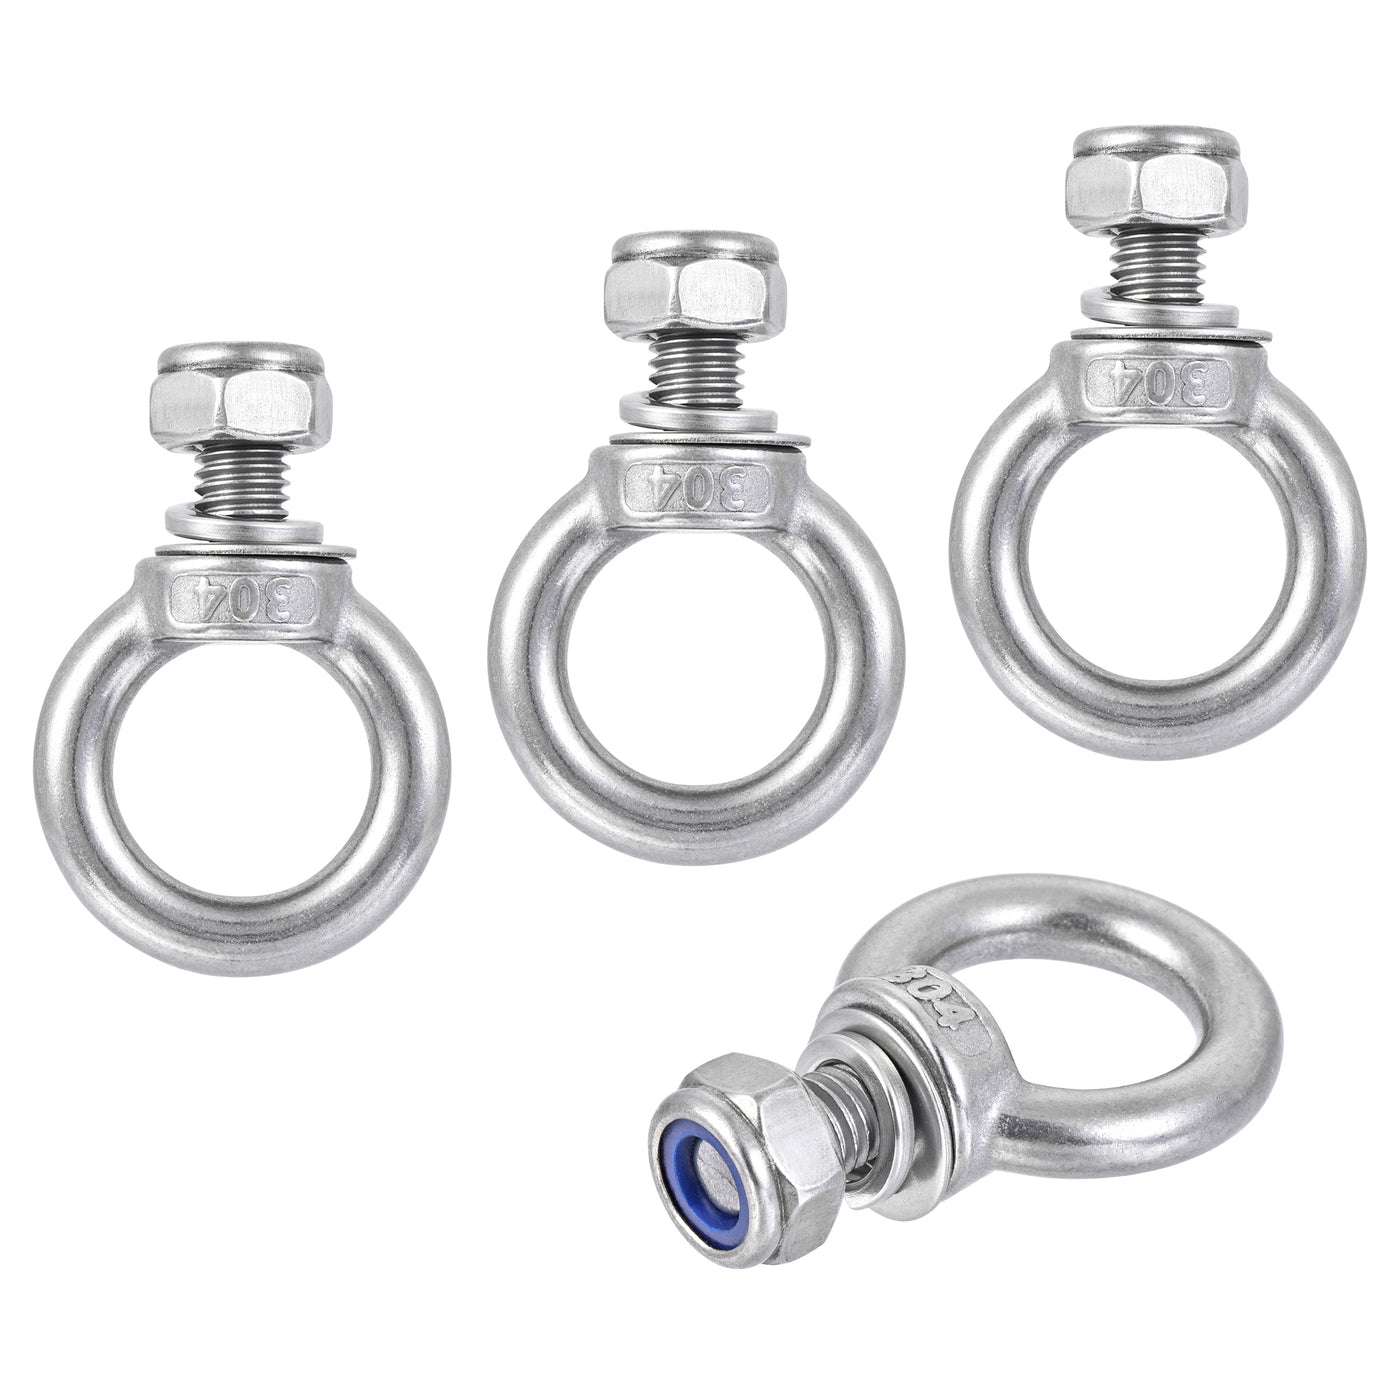 uxcell Uxcell Lifting Eye Bolt M10 x 18mm Male Thread with Hex Screw Nut Gasket Flat Washer for Hanging, 304 Stainless Steel, 4 Sets